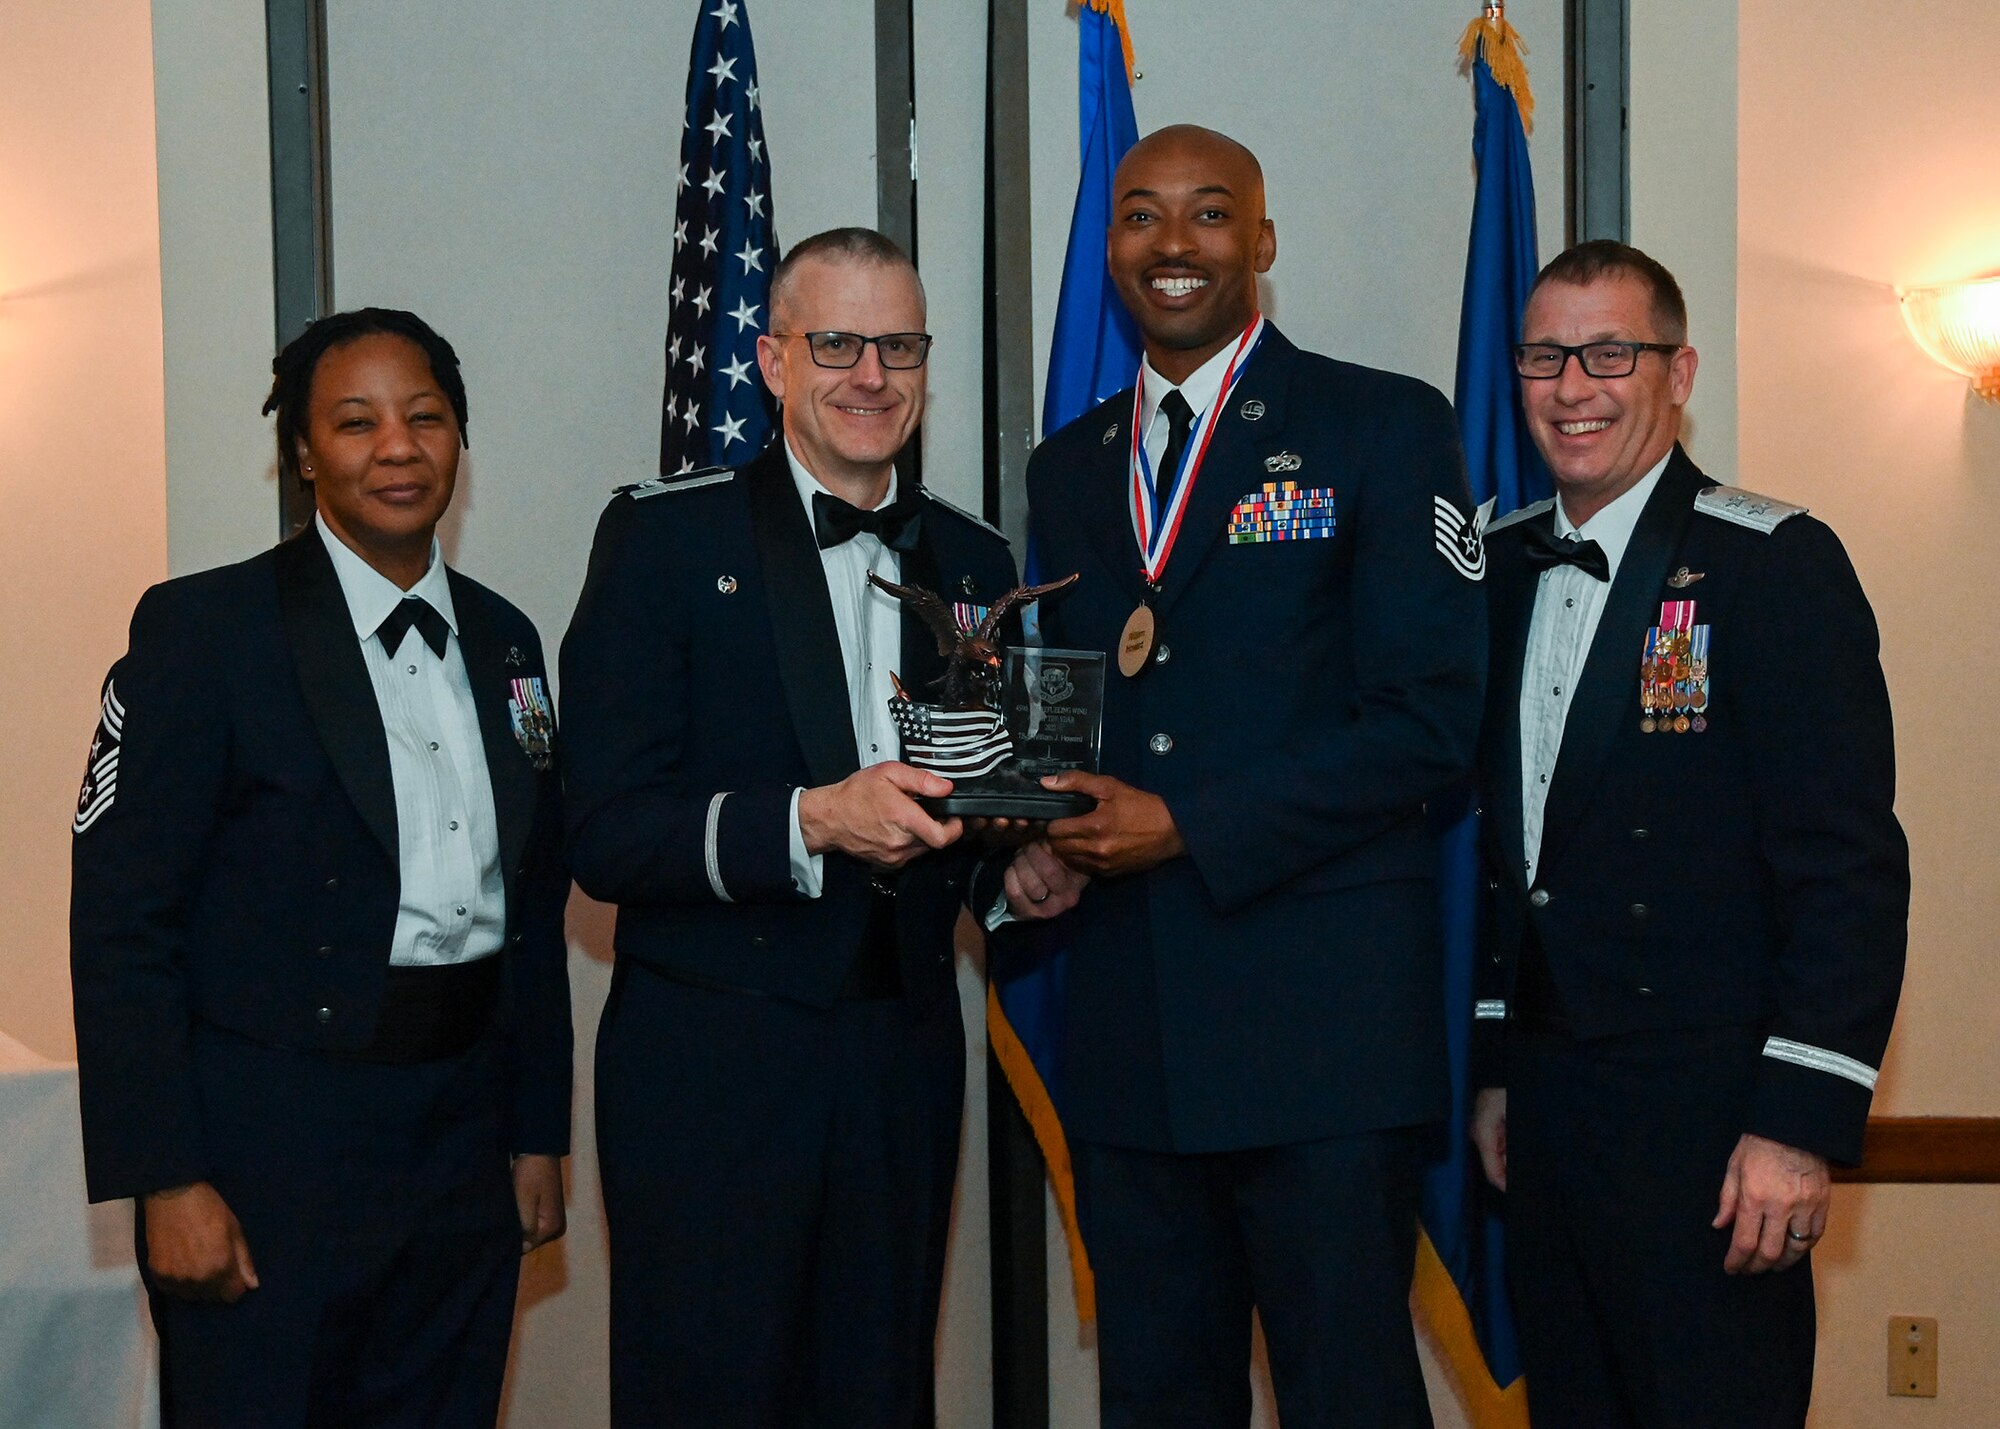 The 459th Air Refueling Wing announces the 2022 Annual Awards winners. The wing held its annual awards banquet to announce the winners on March 4, 2023, at The Club at Andrews.